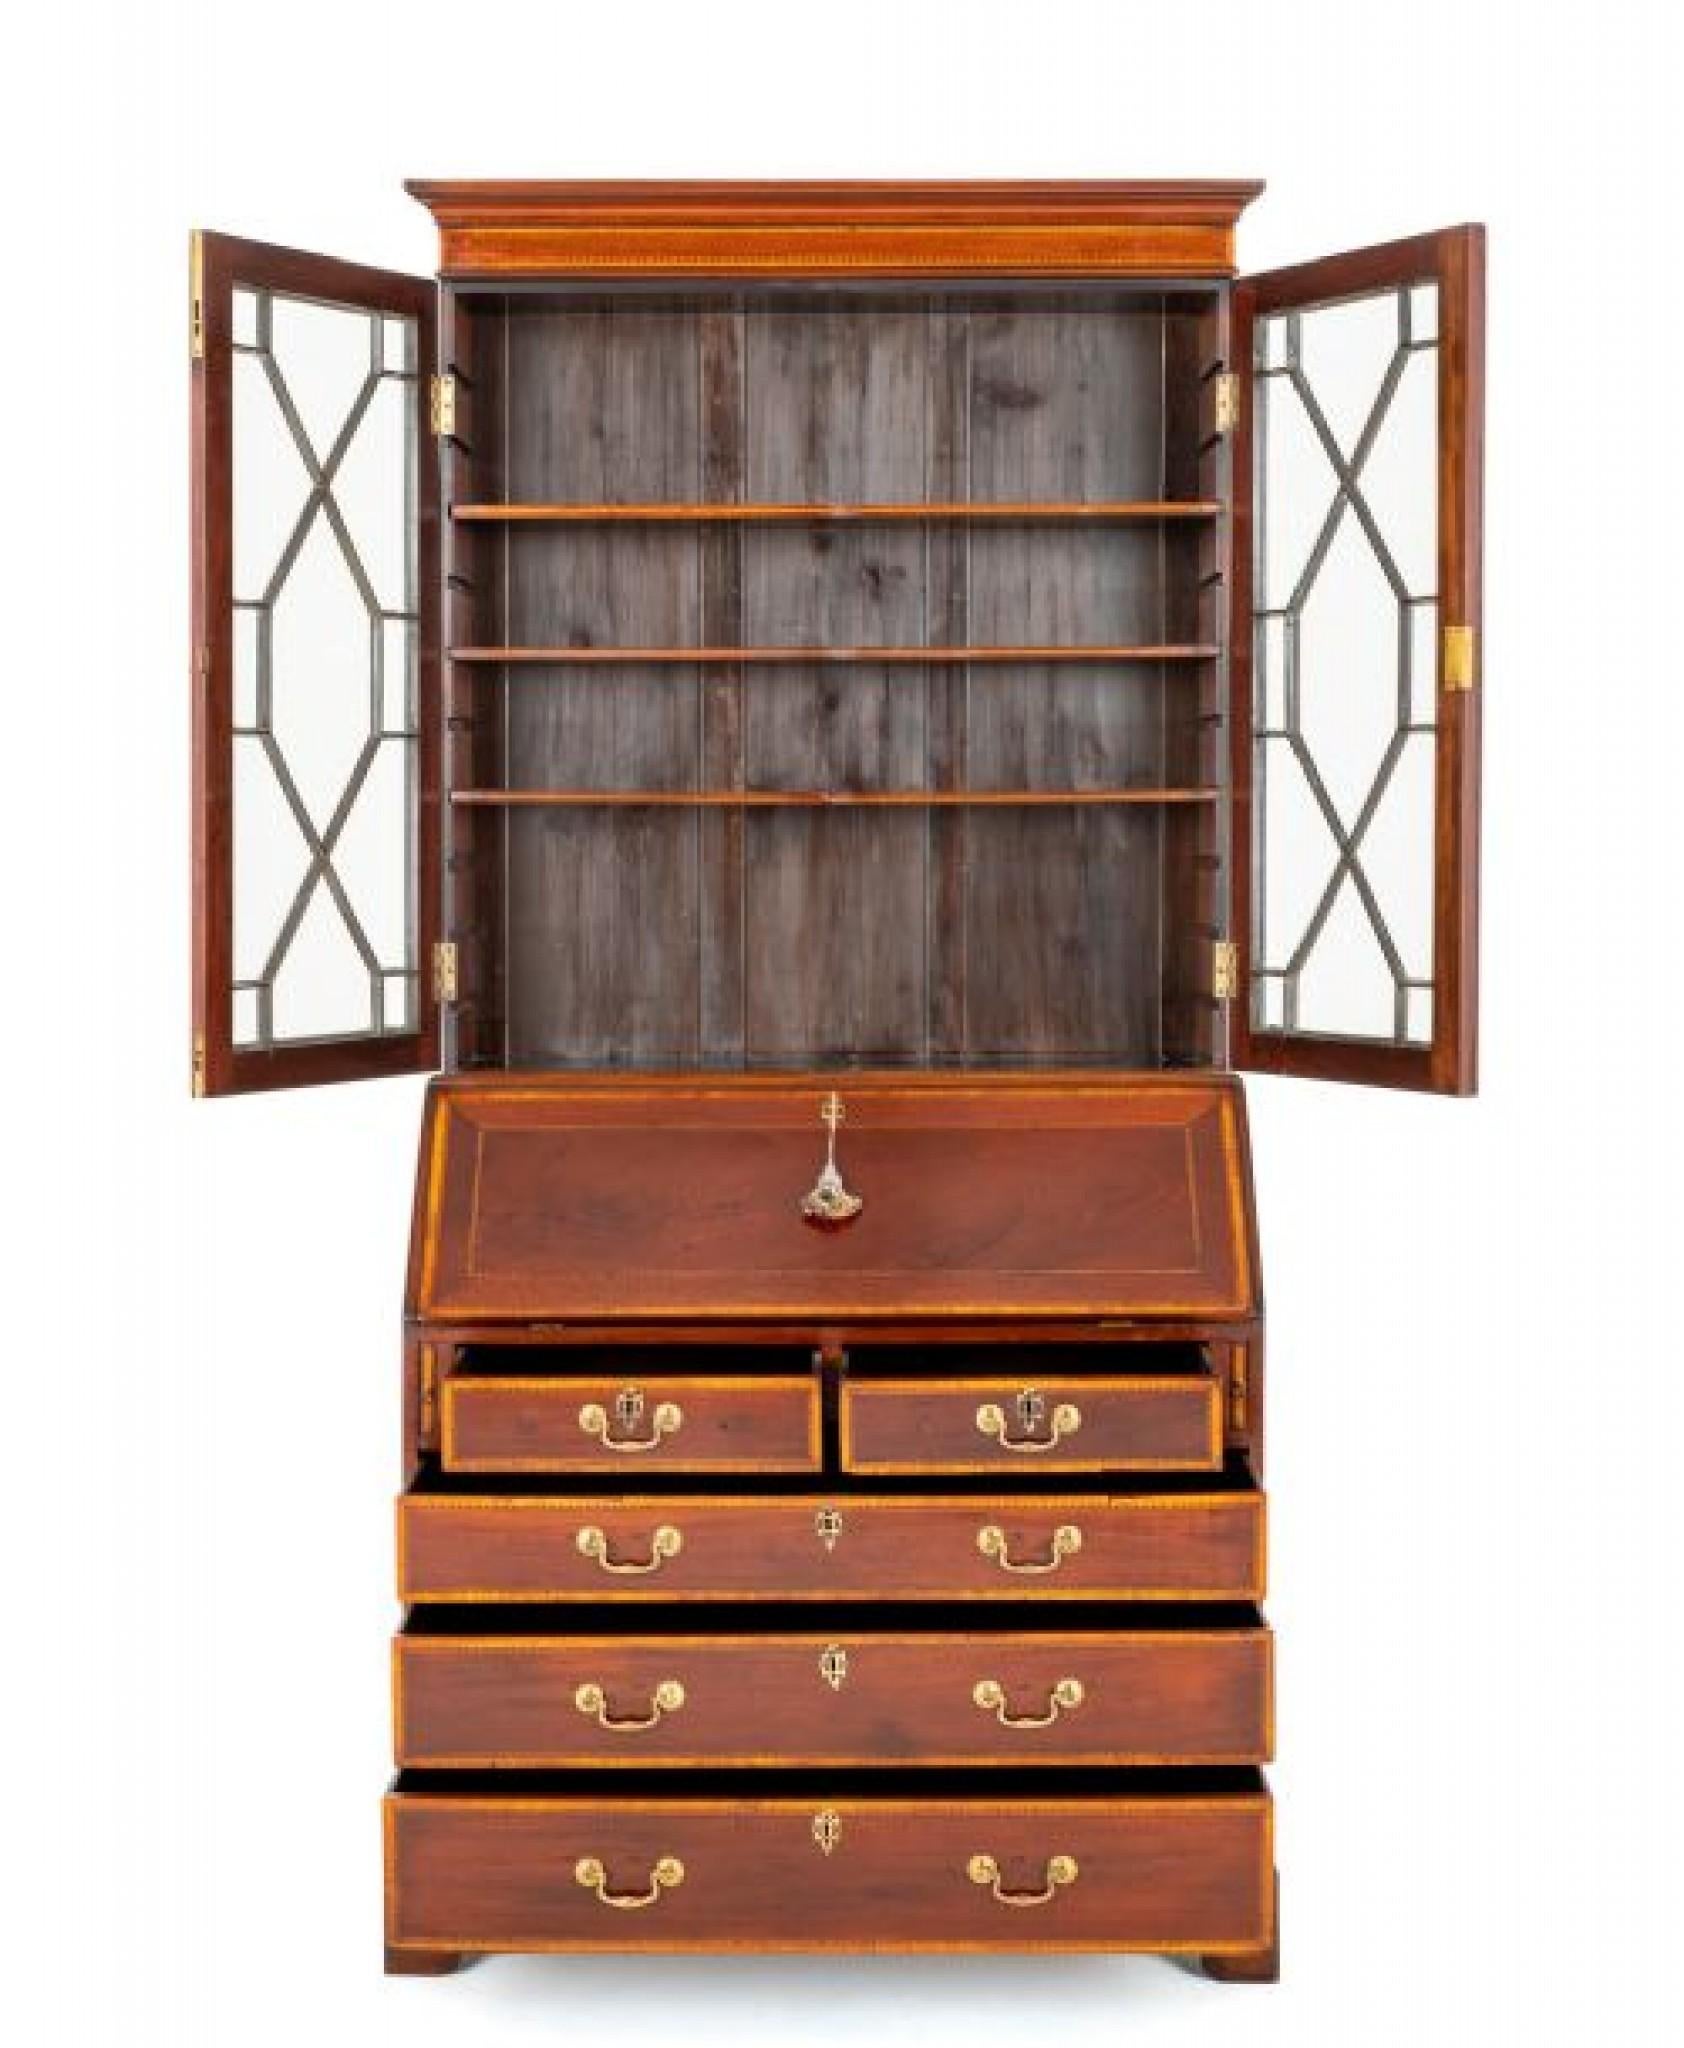 Georgian Bureau Bookcase Period Mahogany Antique 1800 In Good Condition For Sale In Potters Bar, GB